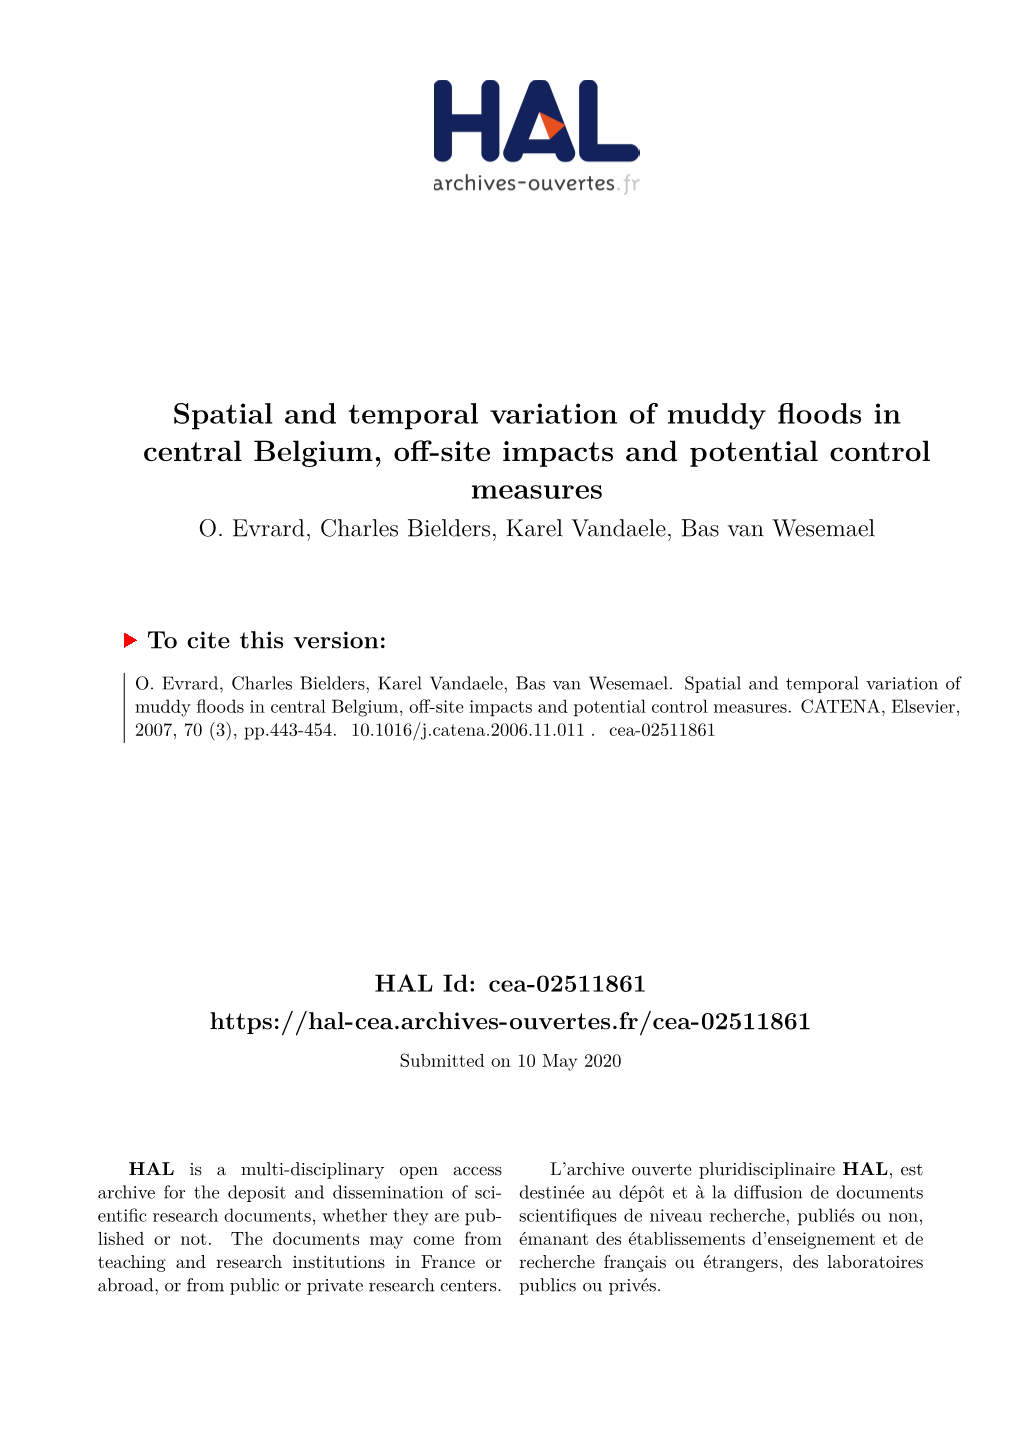 Spatial and Temporal Variation of Muddy Floods in Central Belgium, Off-Site Impacts and Potential Control Measures O